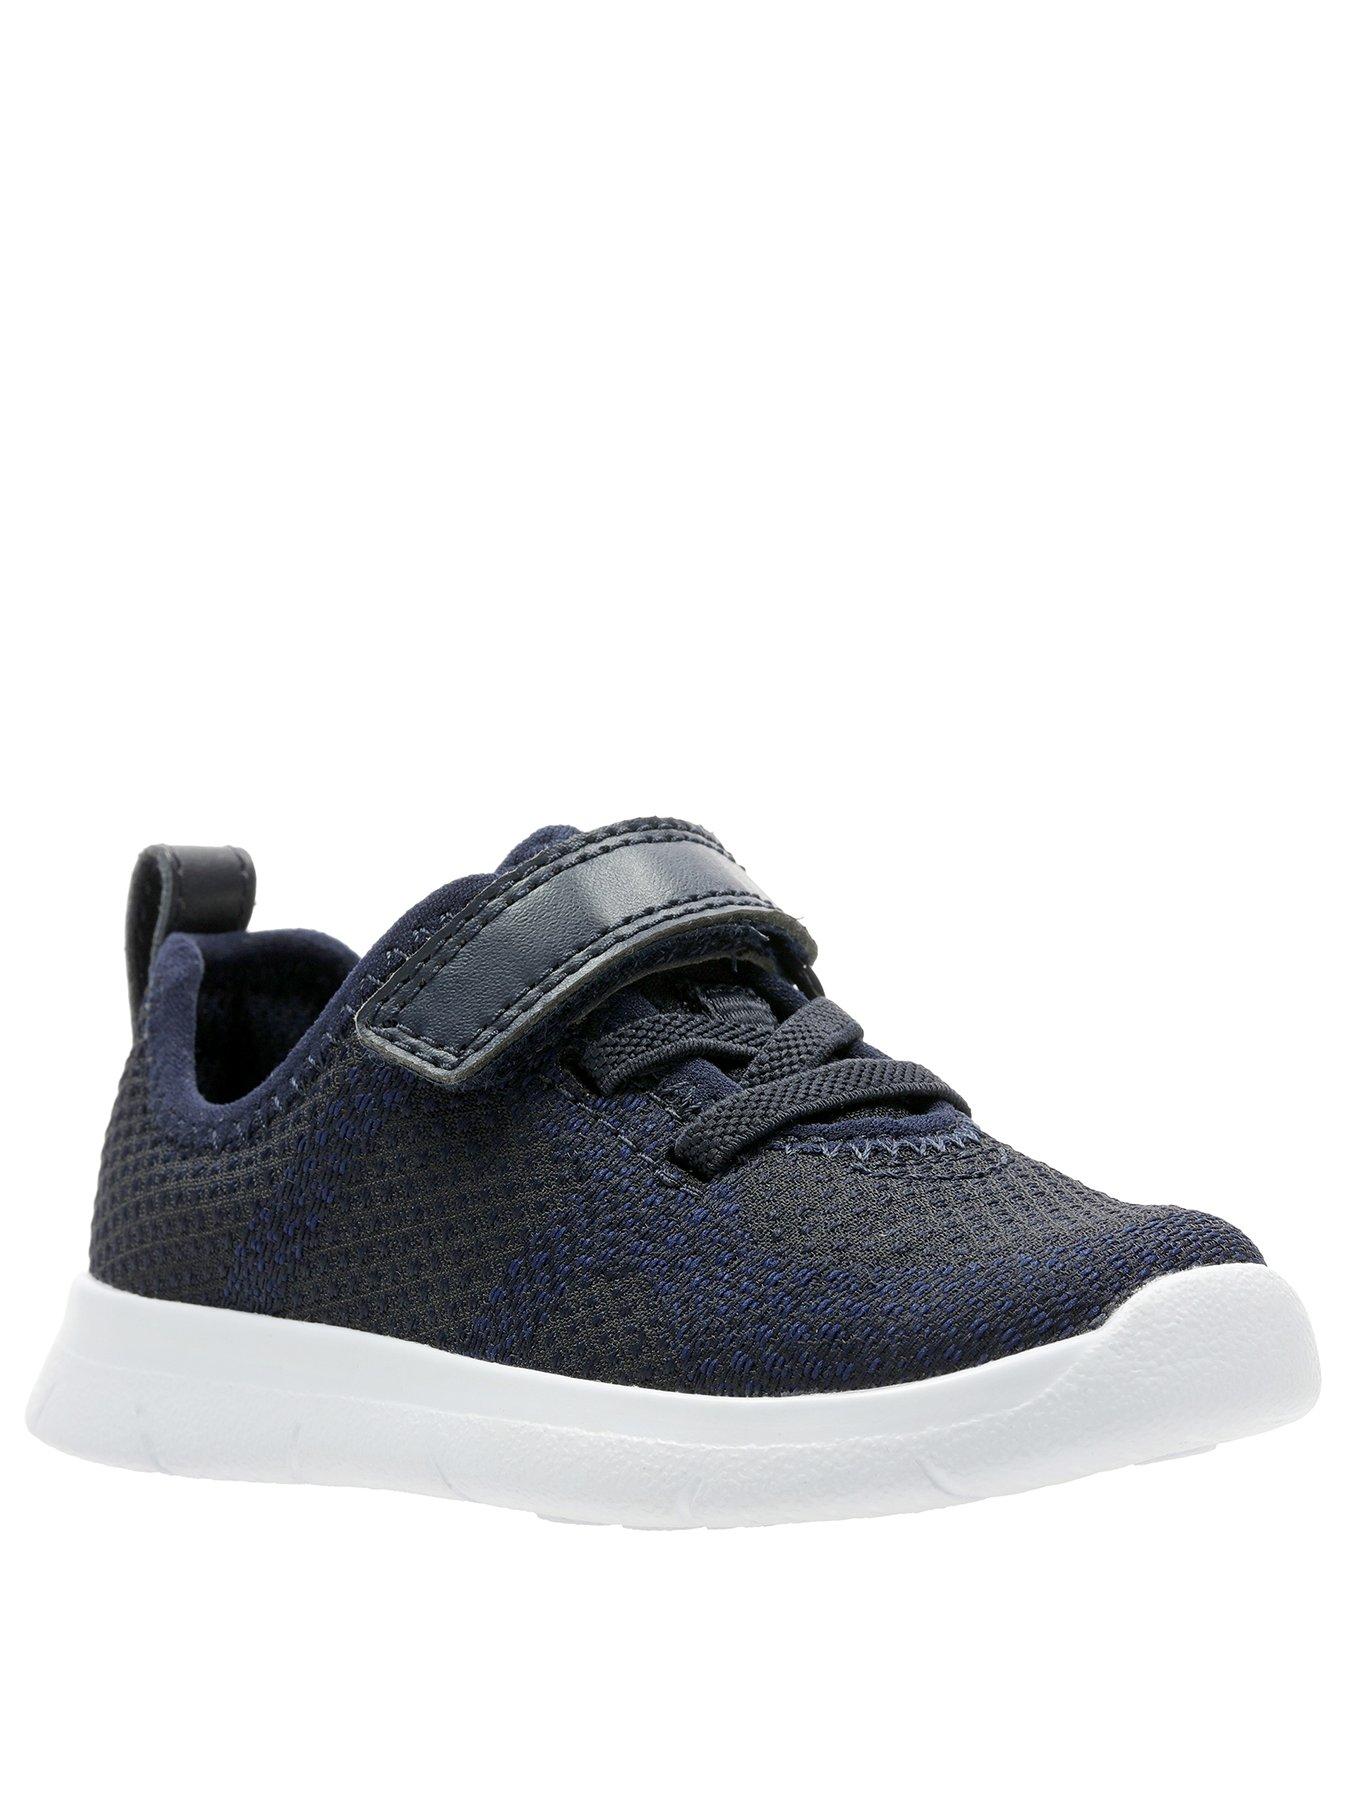 clarks trainers for toddlers